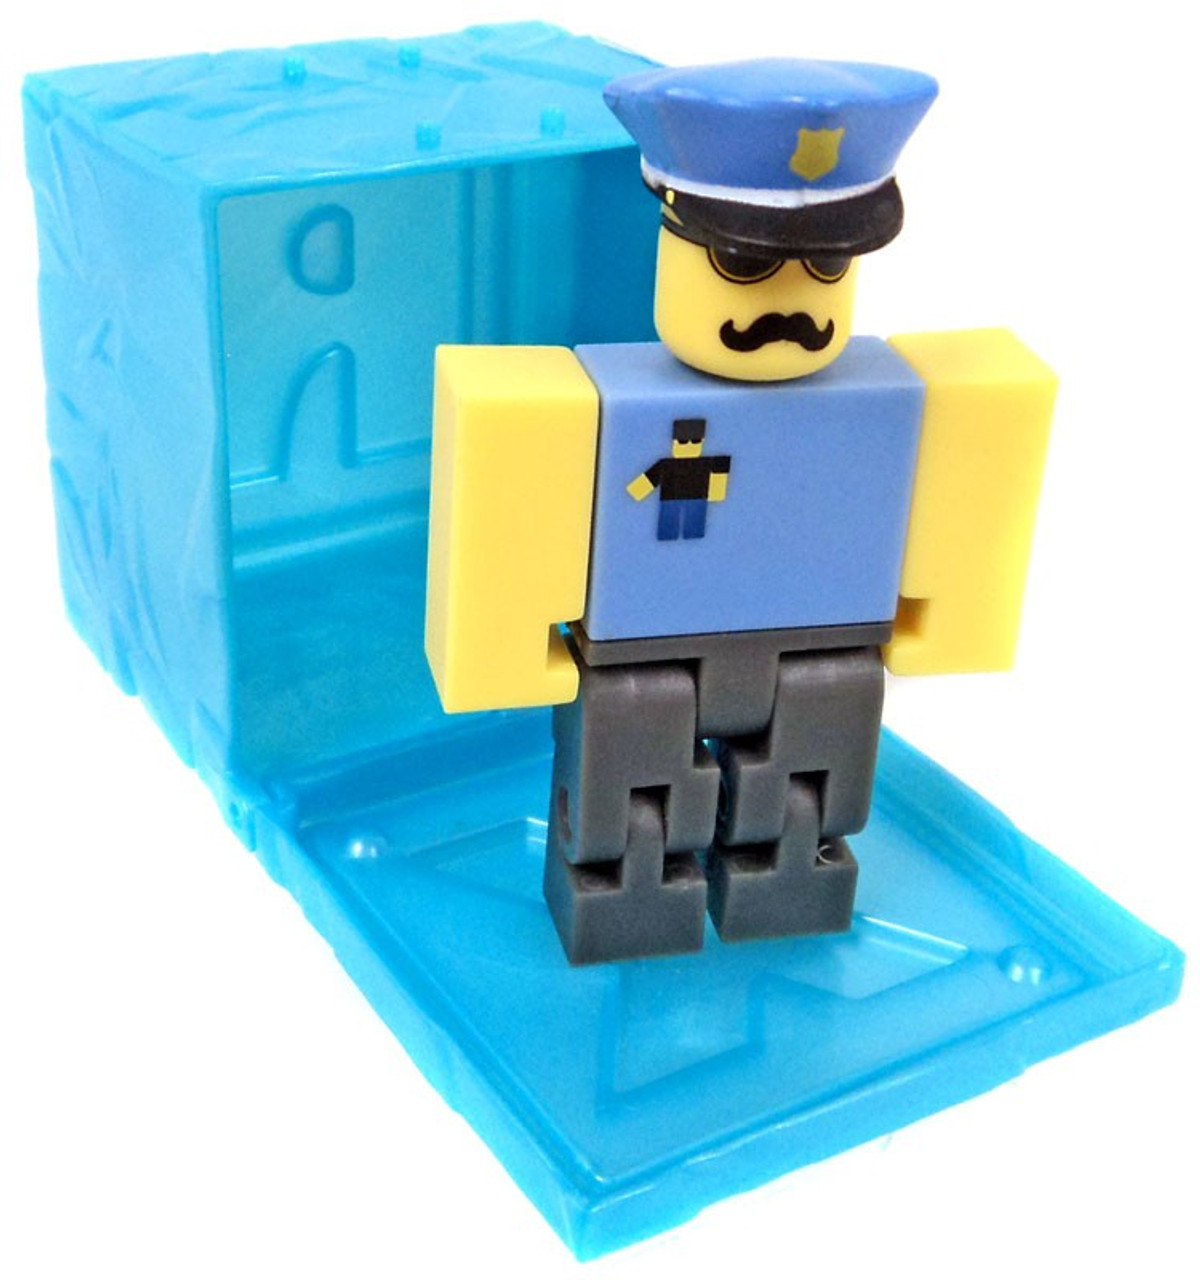 Roblox Red Series 3 Retail Tycoon Rent A Cop 3 Mini Figure Blue Cube With Online Code Loose Jazwares Toywiz - cop outfit roblox